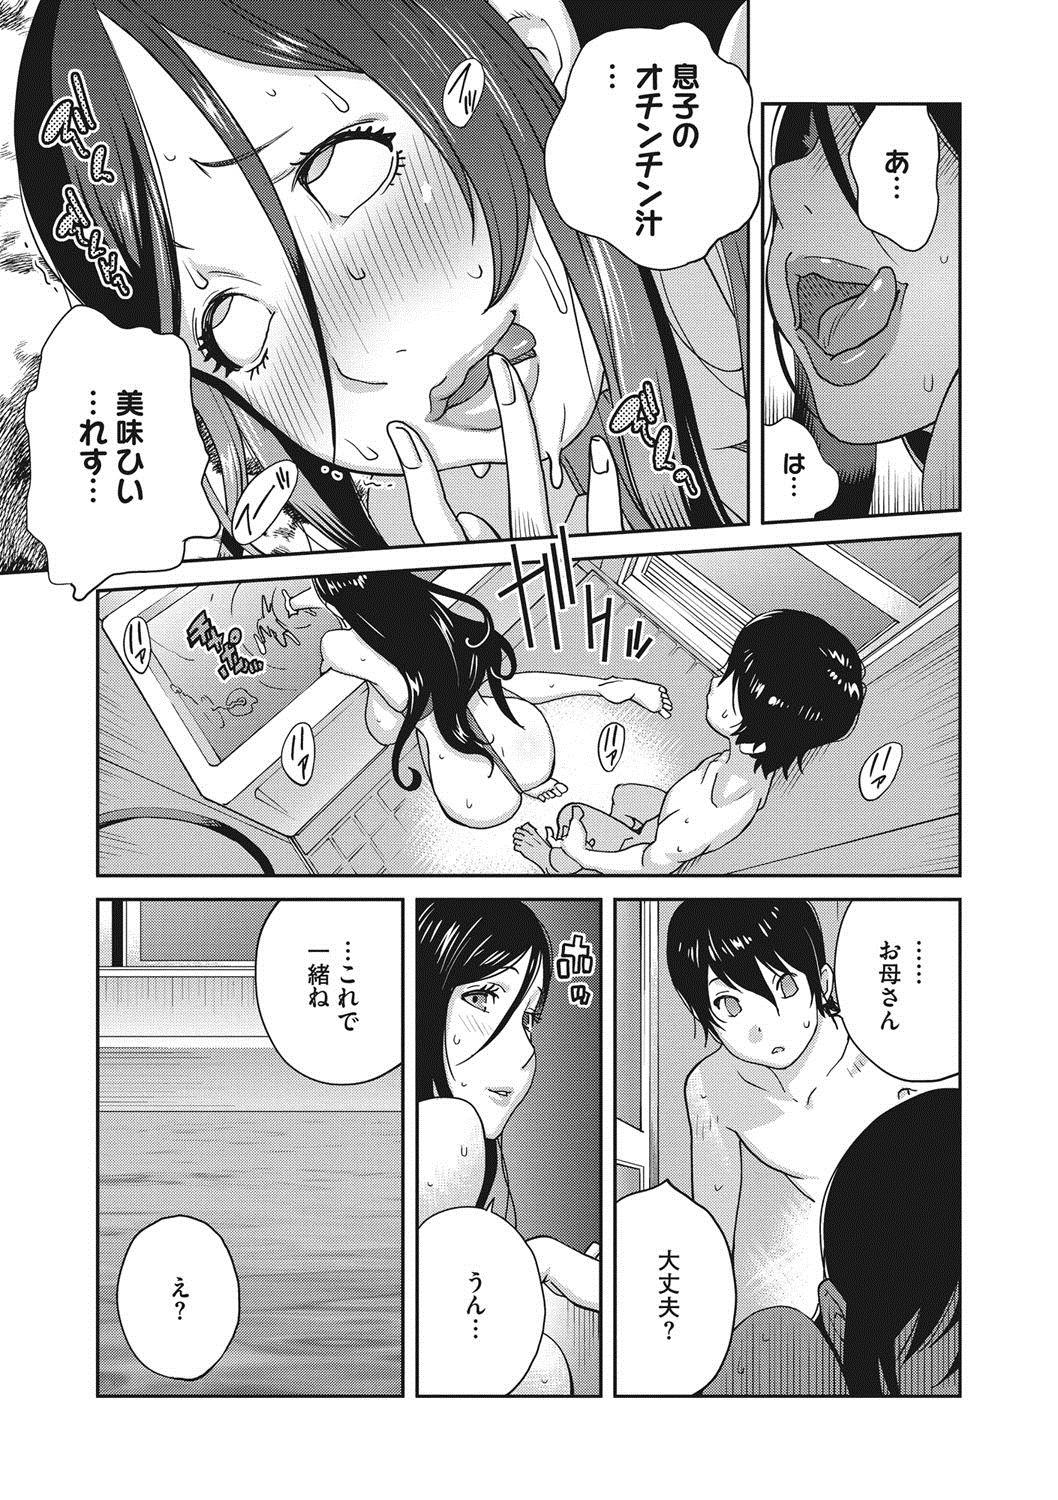 [Kotoyoshi Yumisuke] Haha to Ane to Aoi Ichigo no Fromage - Fromage of mother and an older sister and a blue strawberry Ch. 1-3 38